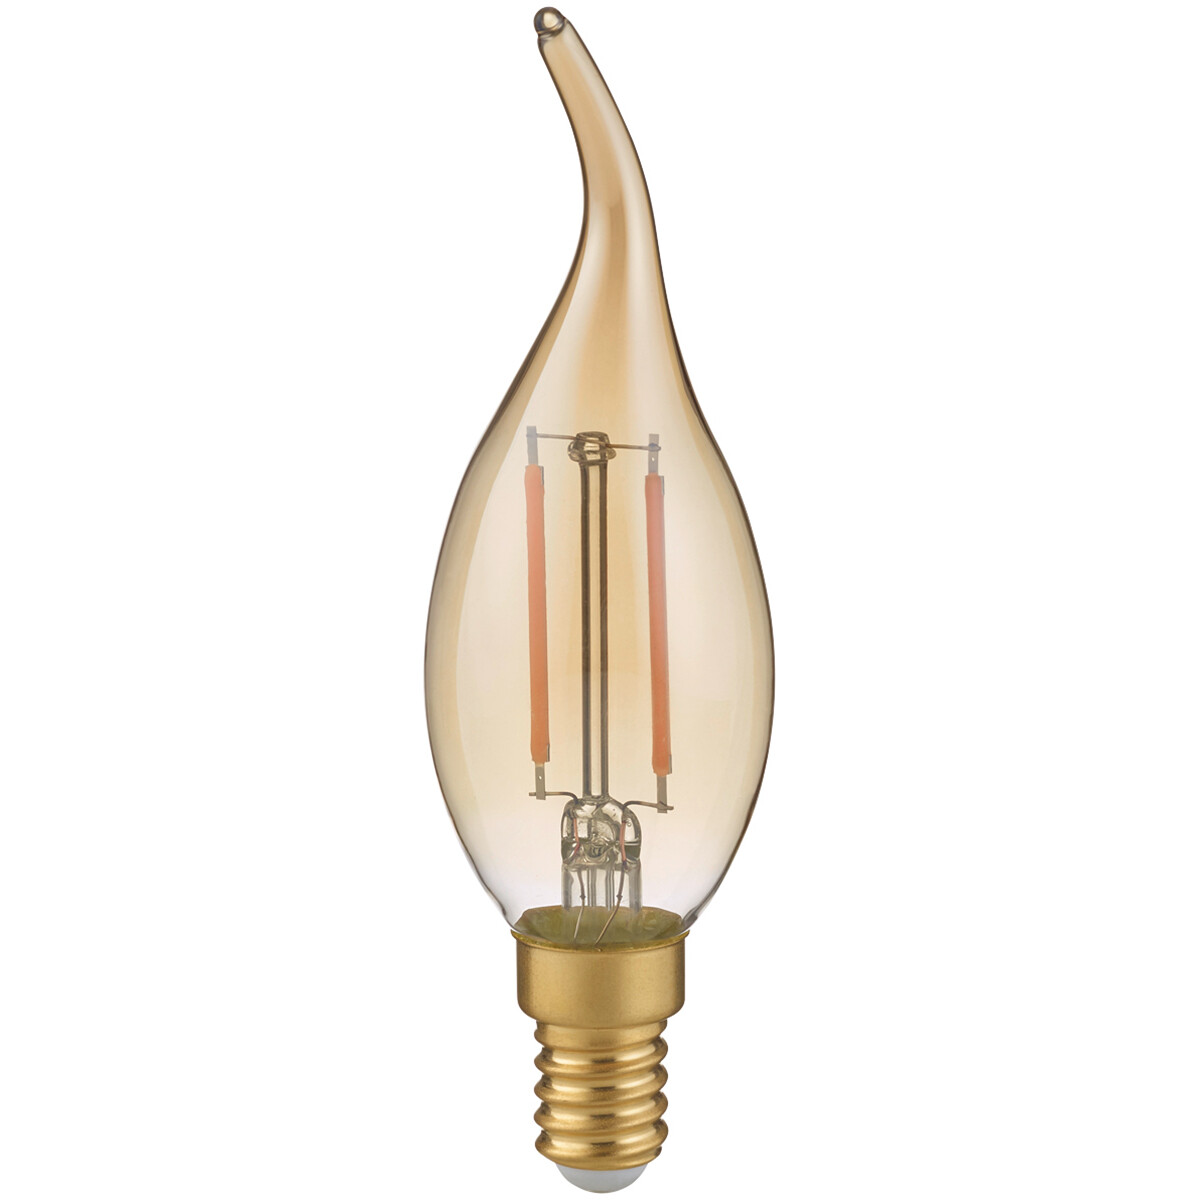 LED Lamp Kaarslamp Filament Trion Kirza E14 Fitting 2W Warm Wit-2700K Amber Glas